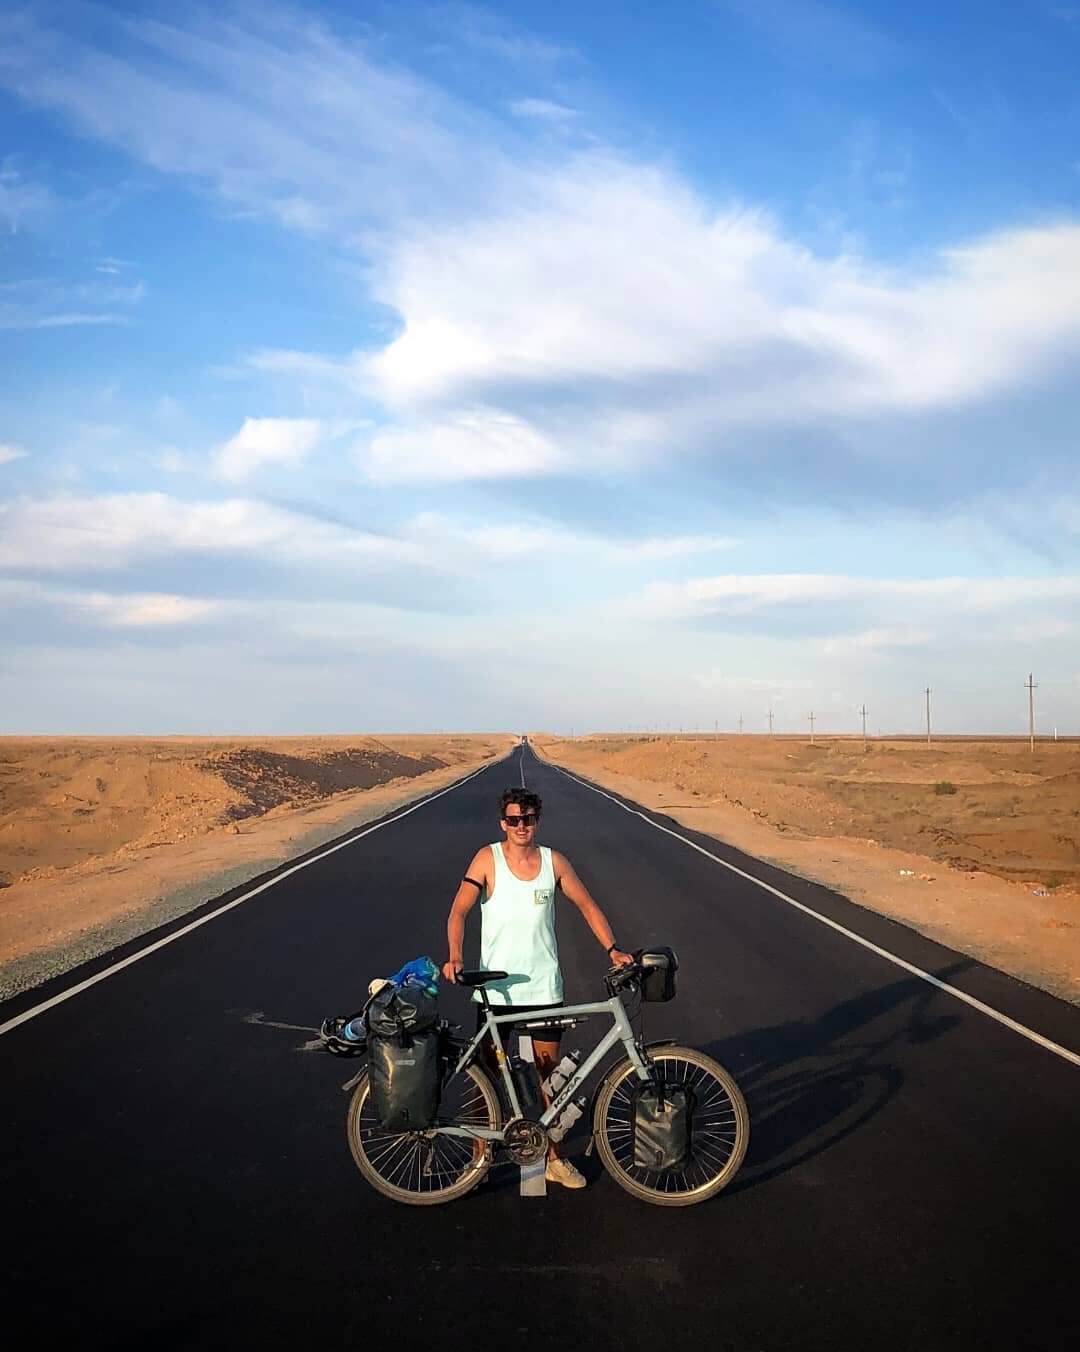 I'm currently crossing the Kyzylkum Desert in Uzbekistan, which is the 15th largest desert in the world!

With temperatures rising above 40 degrees and quite a bit of sand and dust blowing around it is sure to be a pretty epic adventure! That's why w